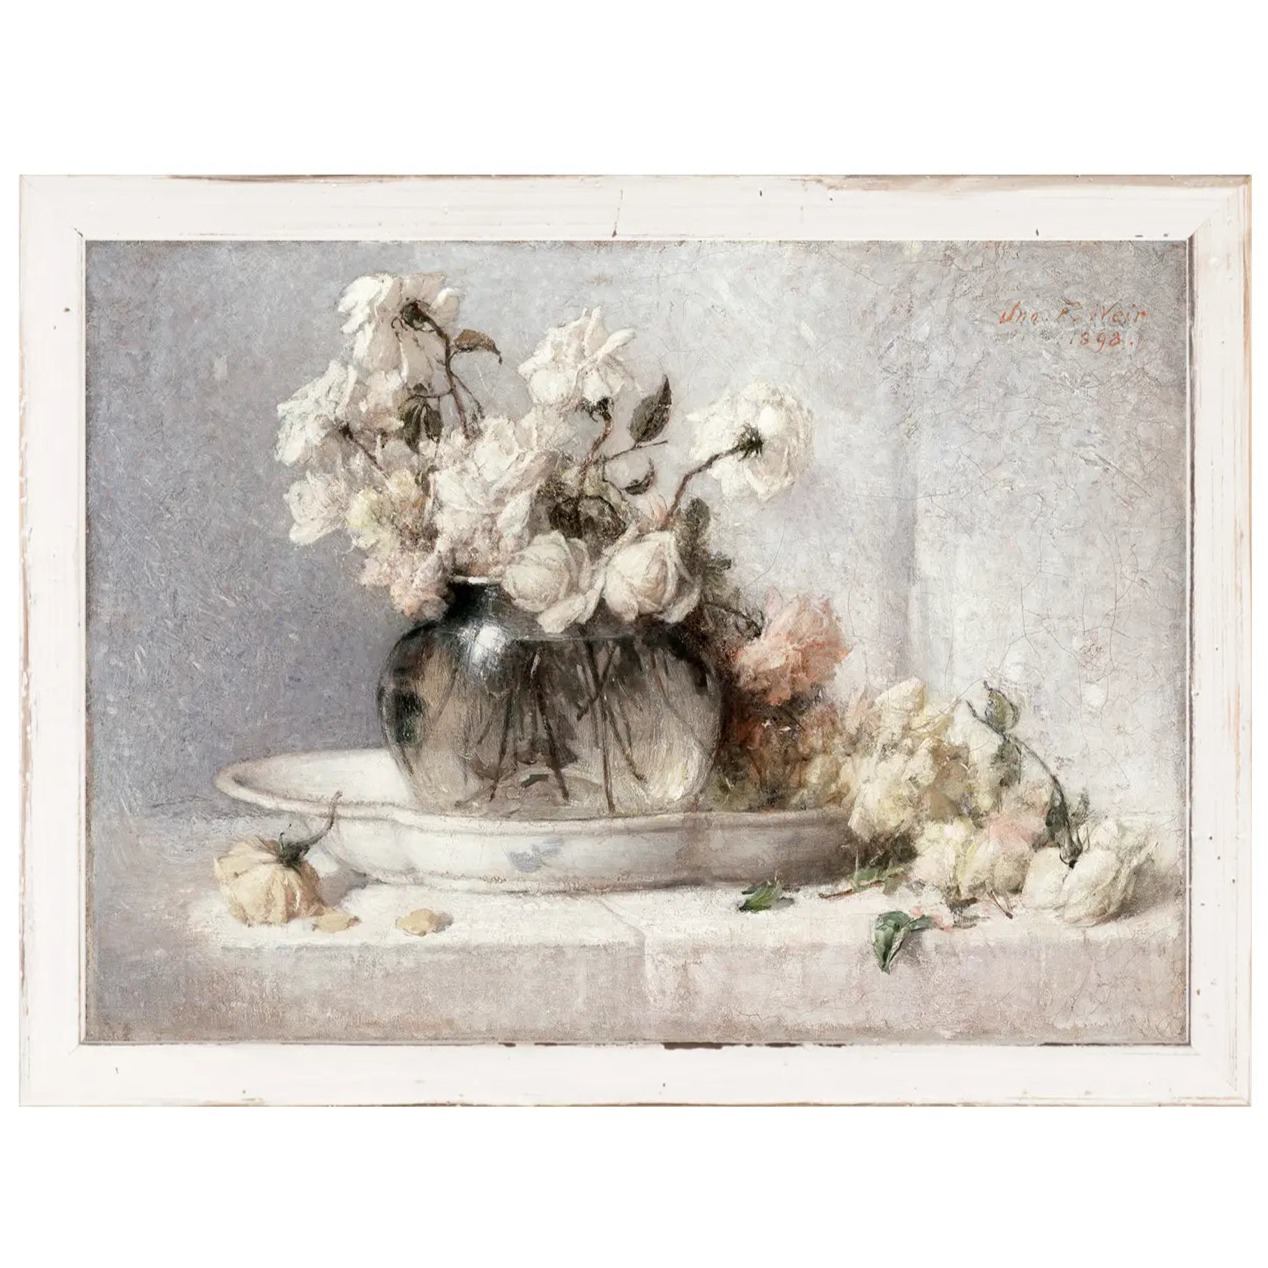 Home Smith Petite Florals - Roses In A Glass Vessel Framed Art Print Home Smith